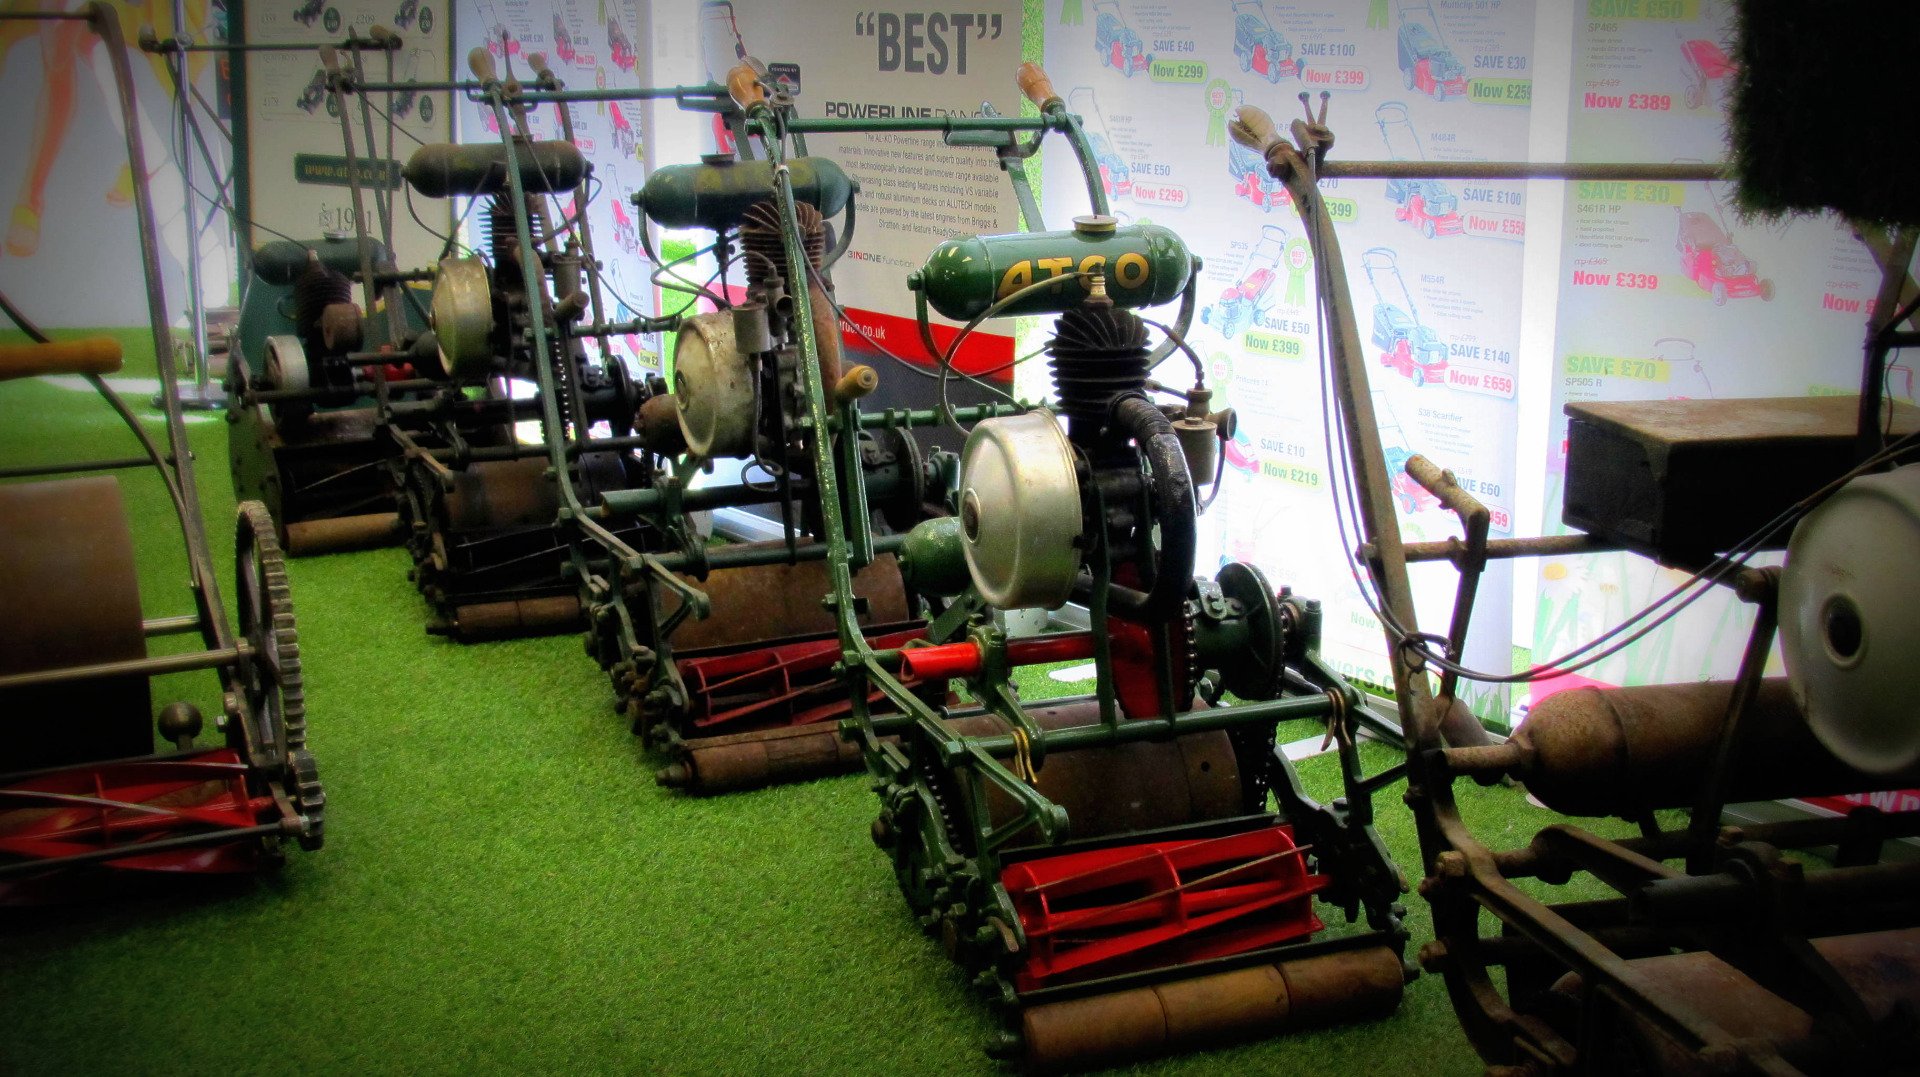 The British Lawnmower Museum is a place to celebrate the history of the lawnmower.